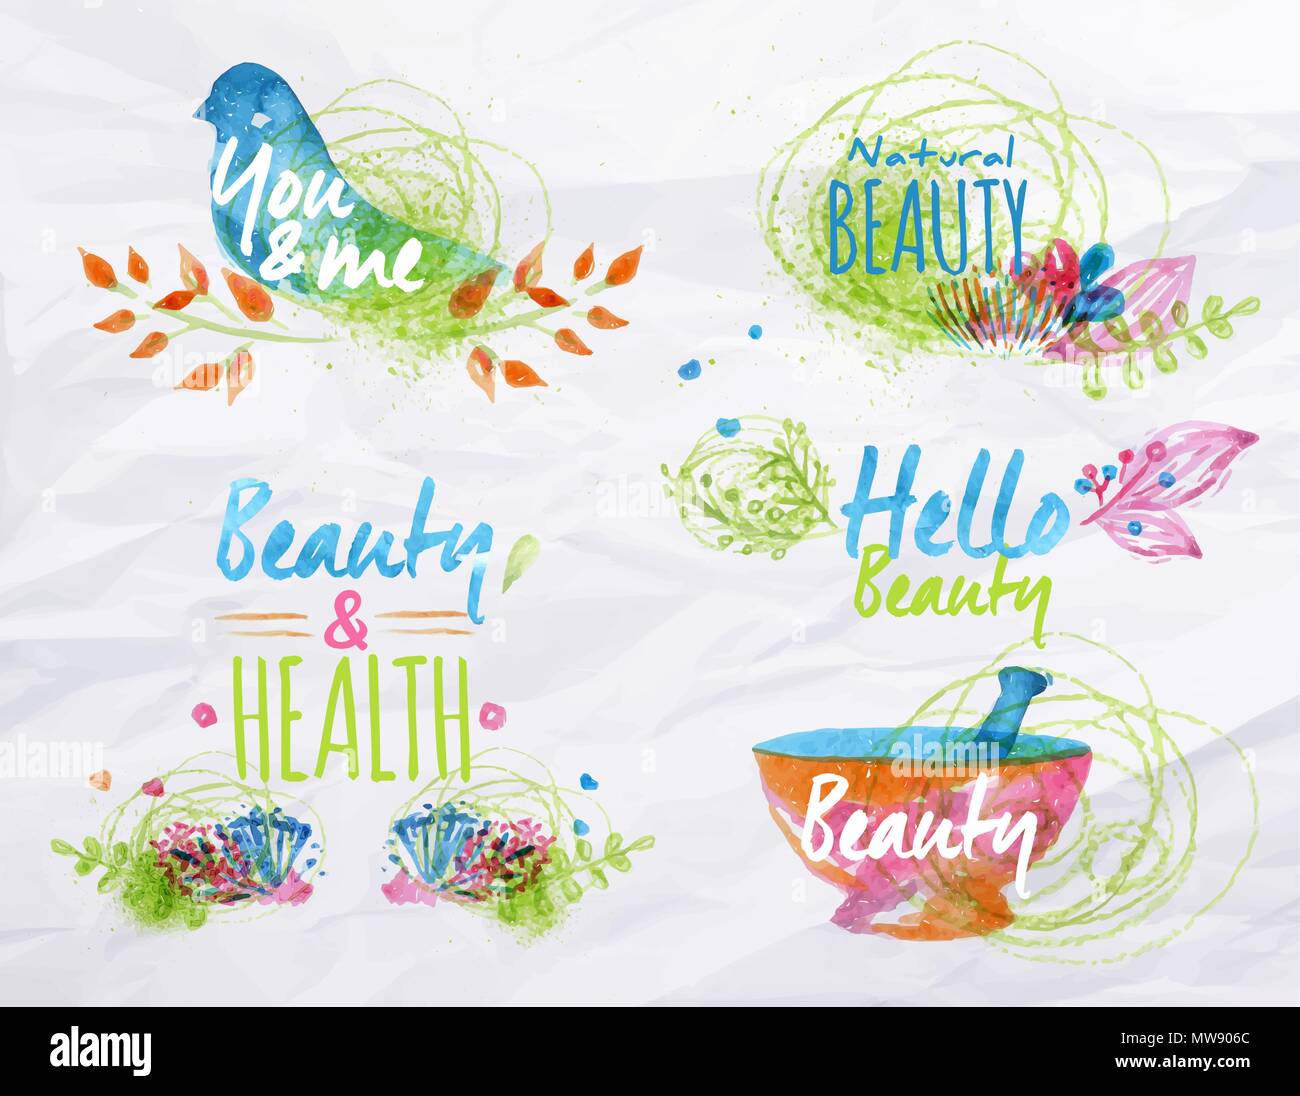 Watercolor symbols elements on beauty bright flowers twigs nature stylized as freehand drawing with watercolor Stock Vector